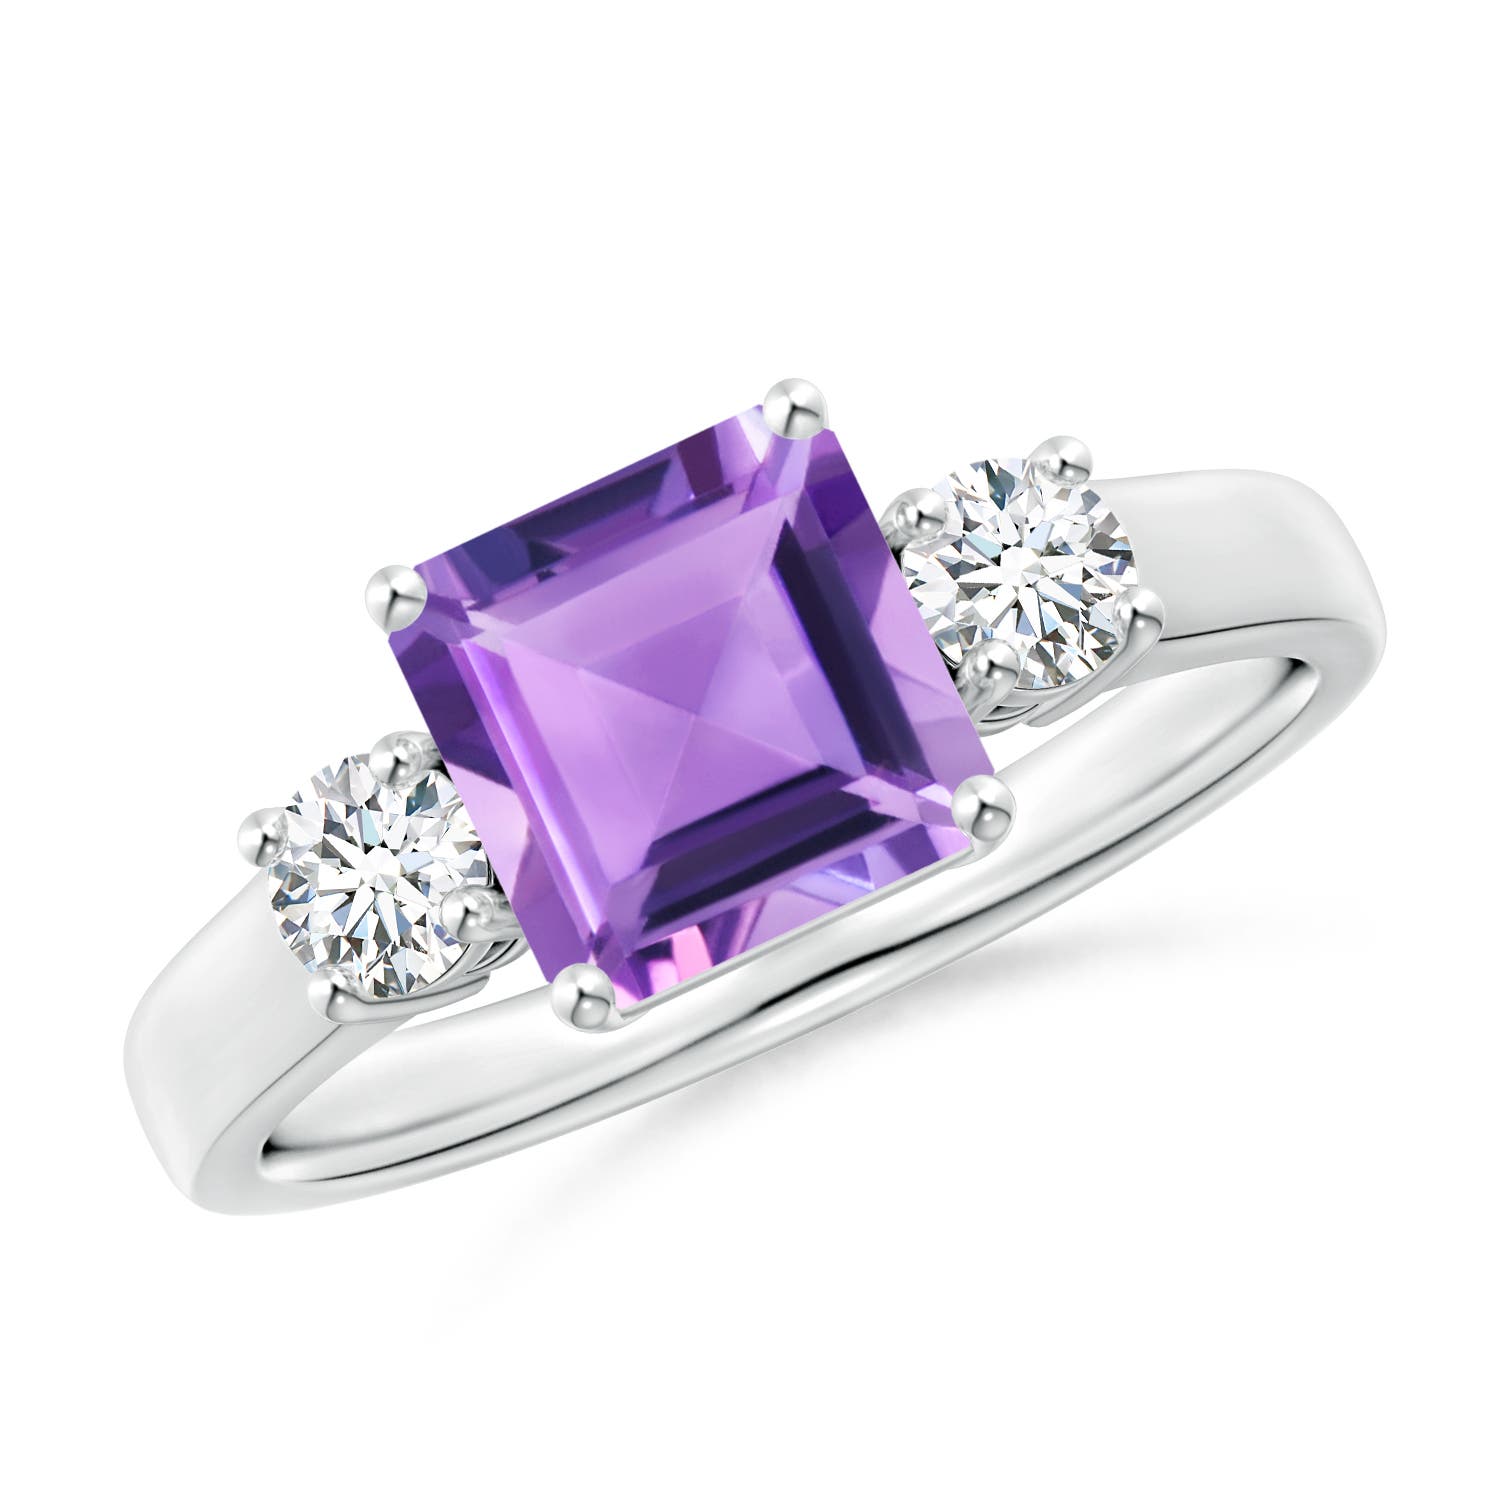 A - Amethyst / 1.62 CT / 14 KT White Gold